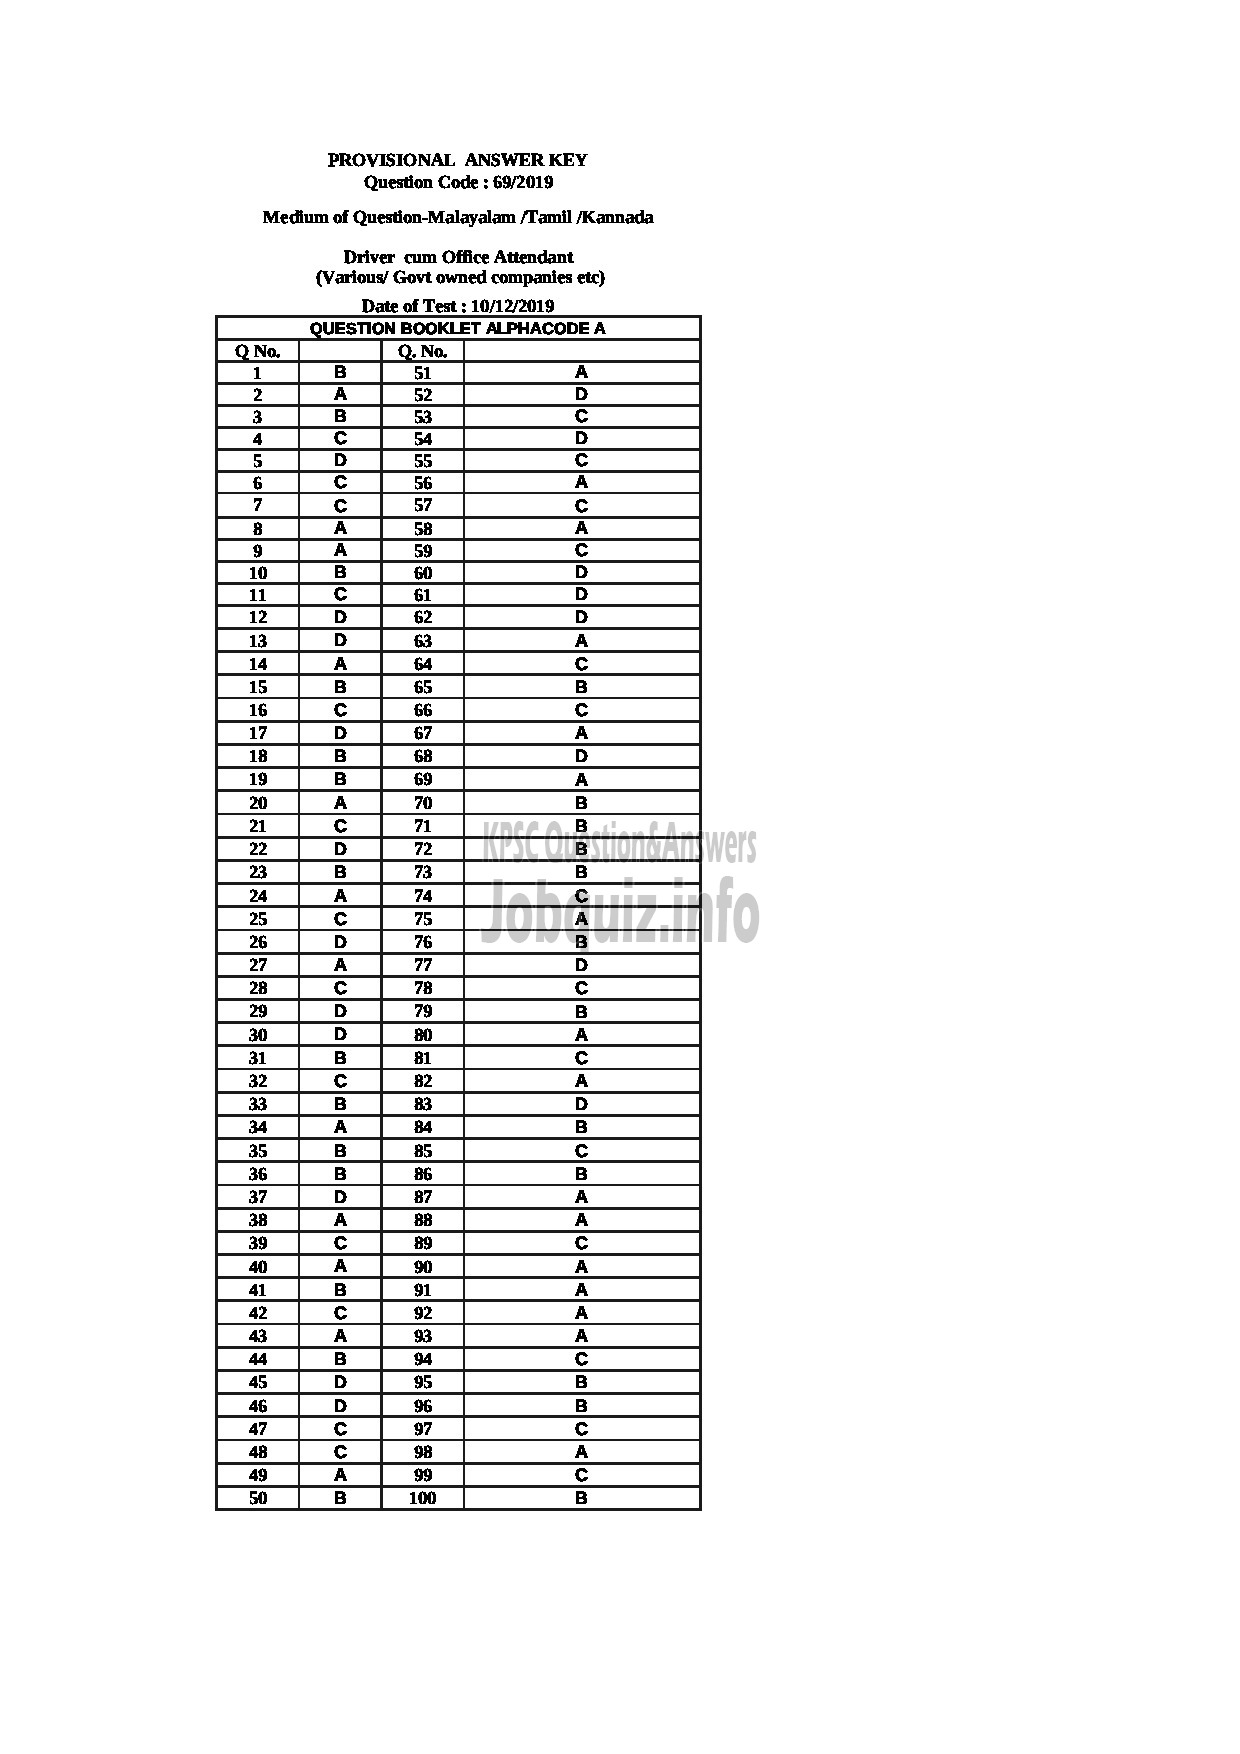 Kerala PSC Answer Key - Driver Cum Office Attendant (Various/ Govt Owned Companies Etc TAMIL